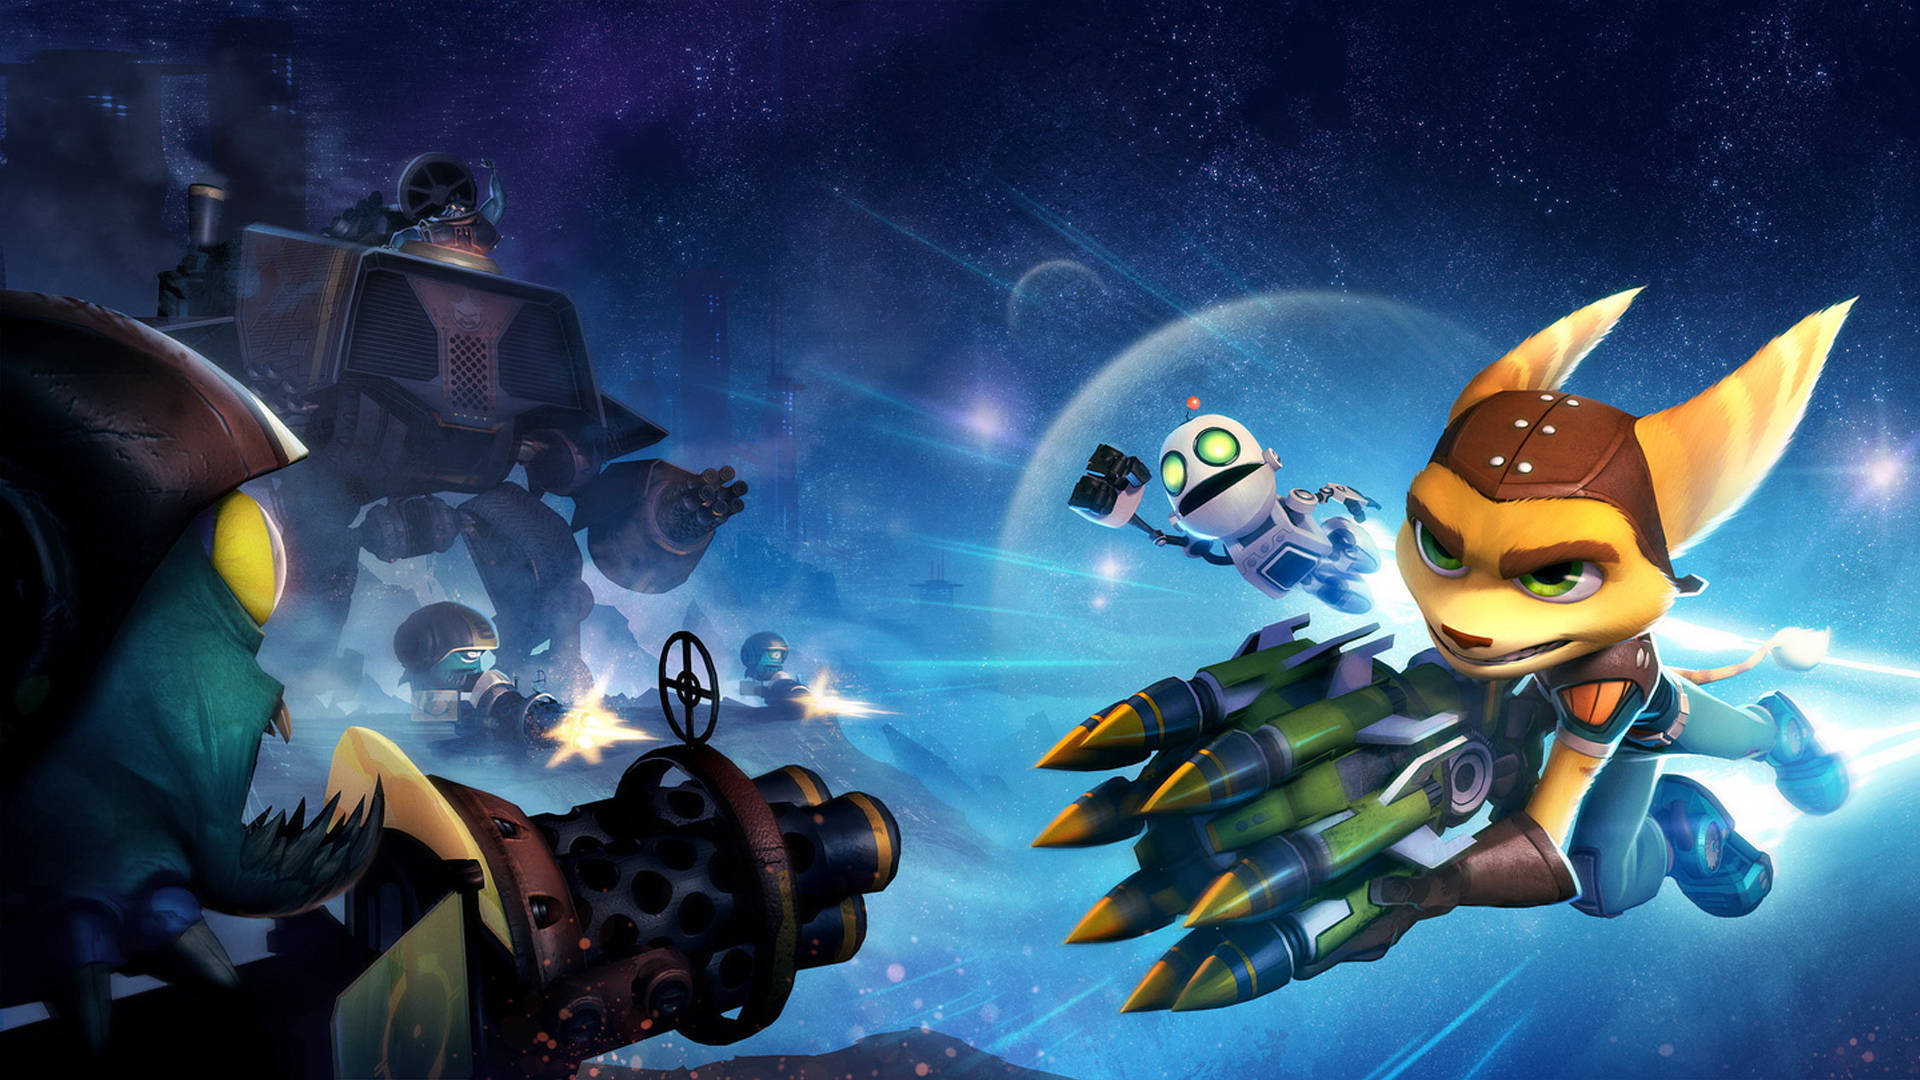 Download Full Hd Ratchet And Clank Wallpaper | Wallpapers.com